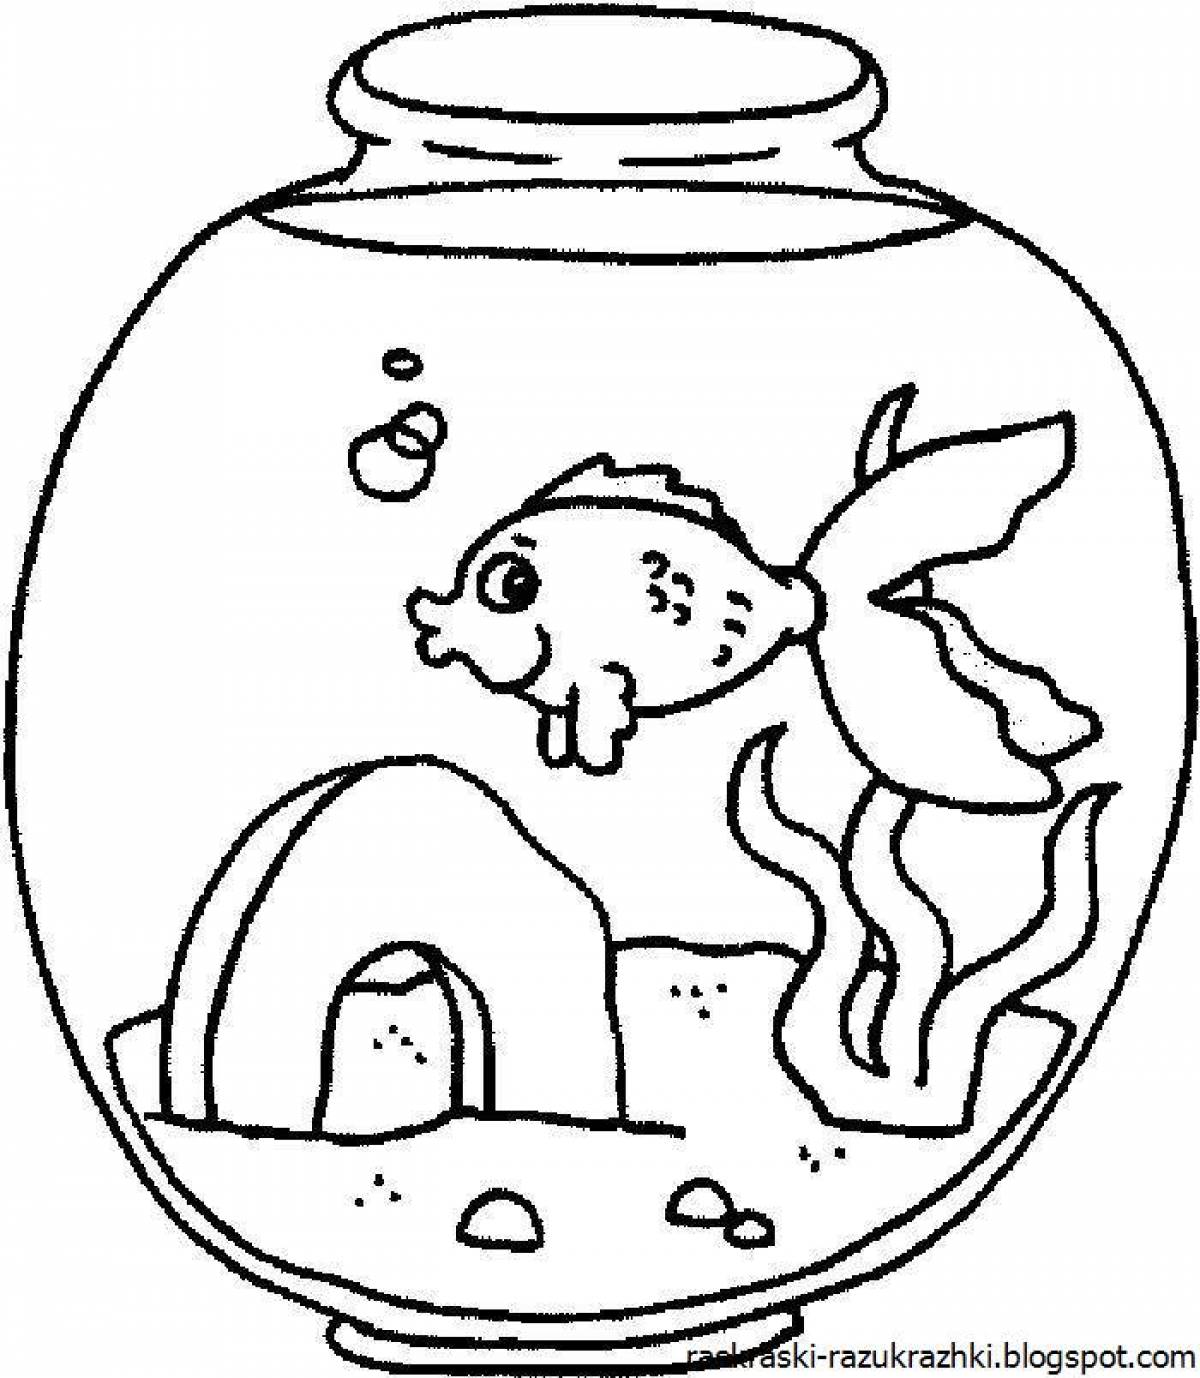 A fun fish tank coloring page for kids